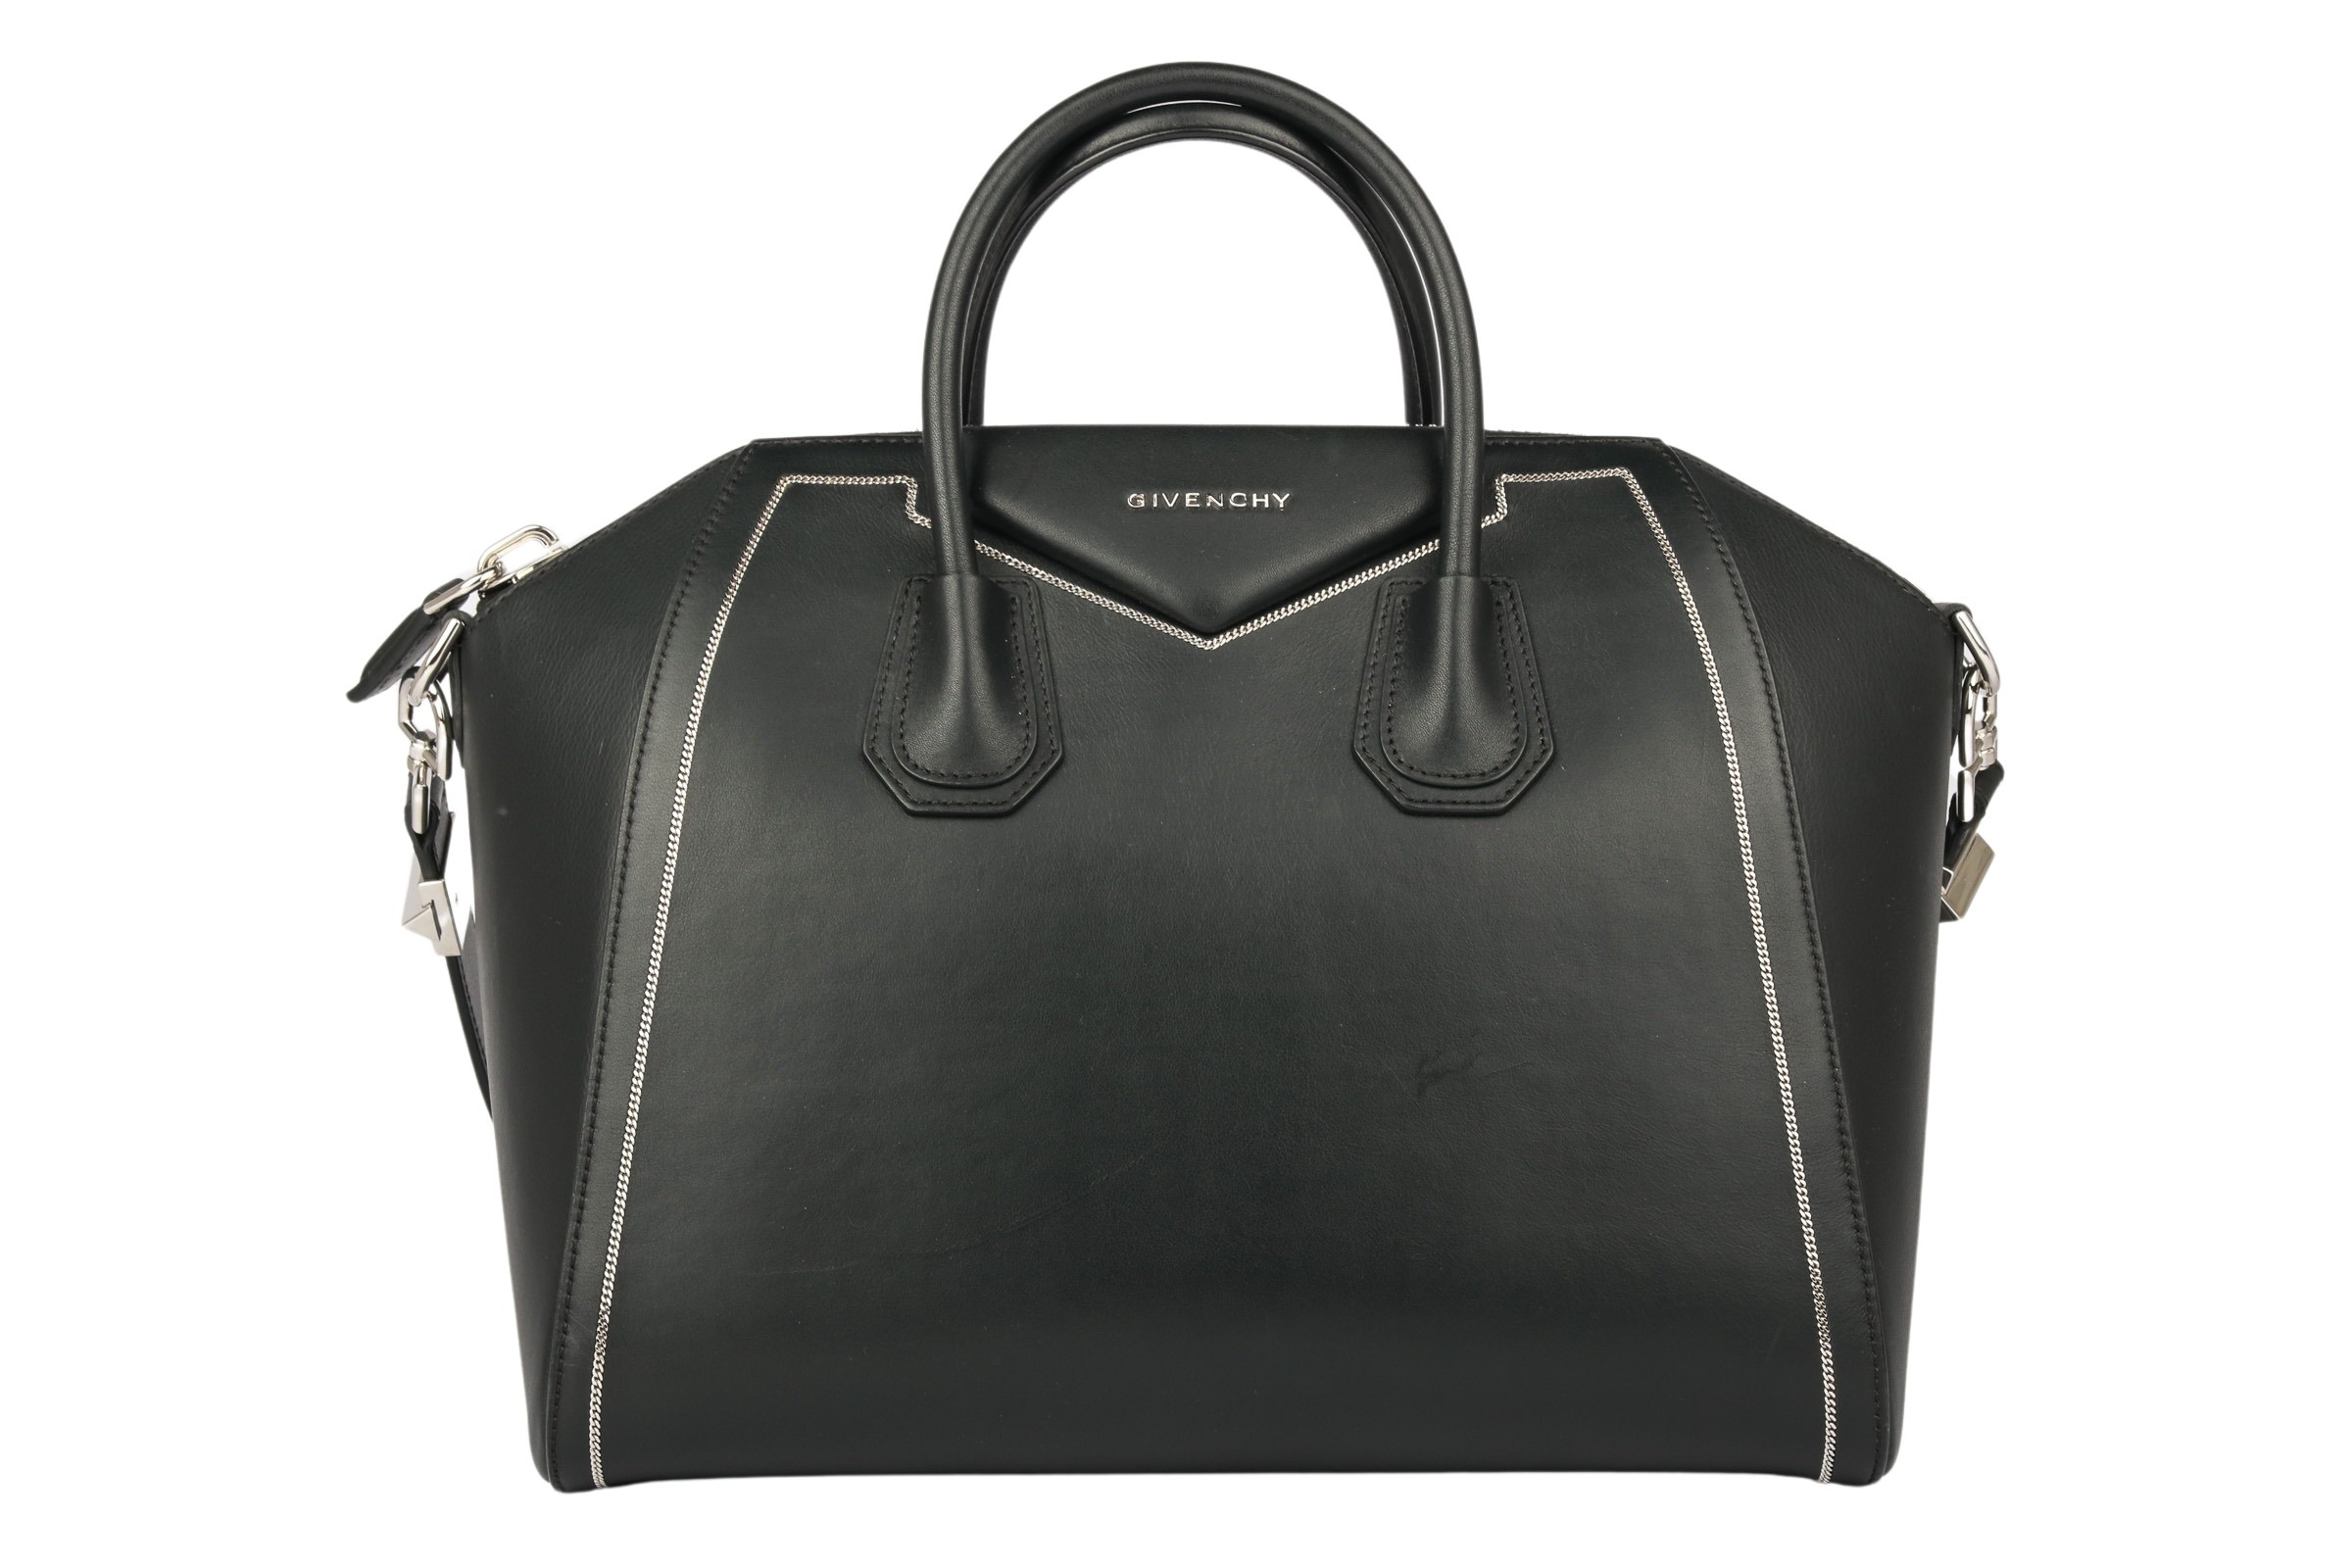 Givenchy Handbags & Accessories